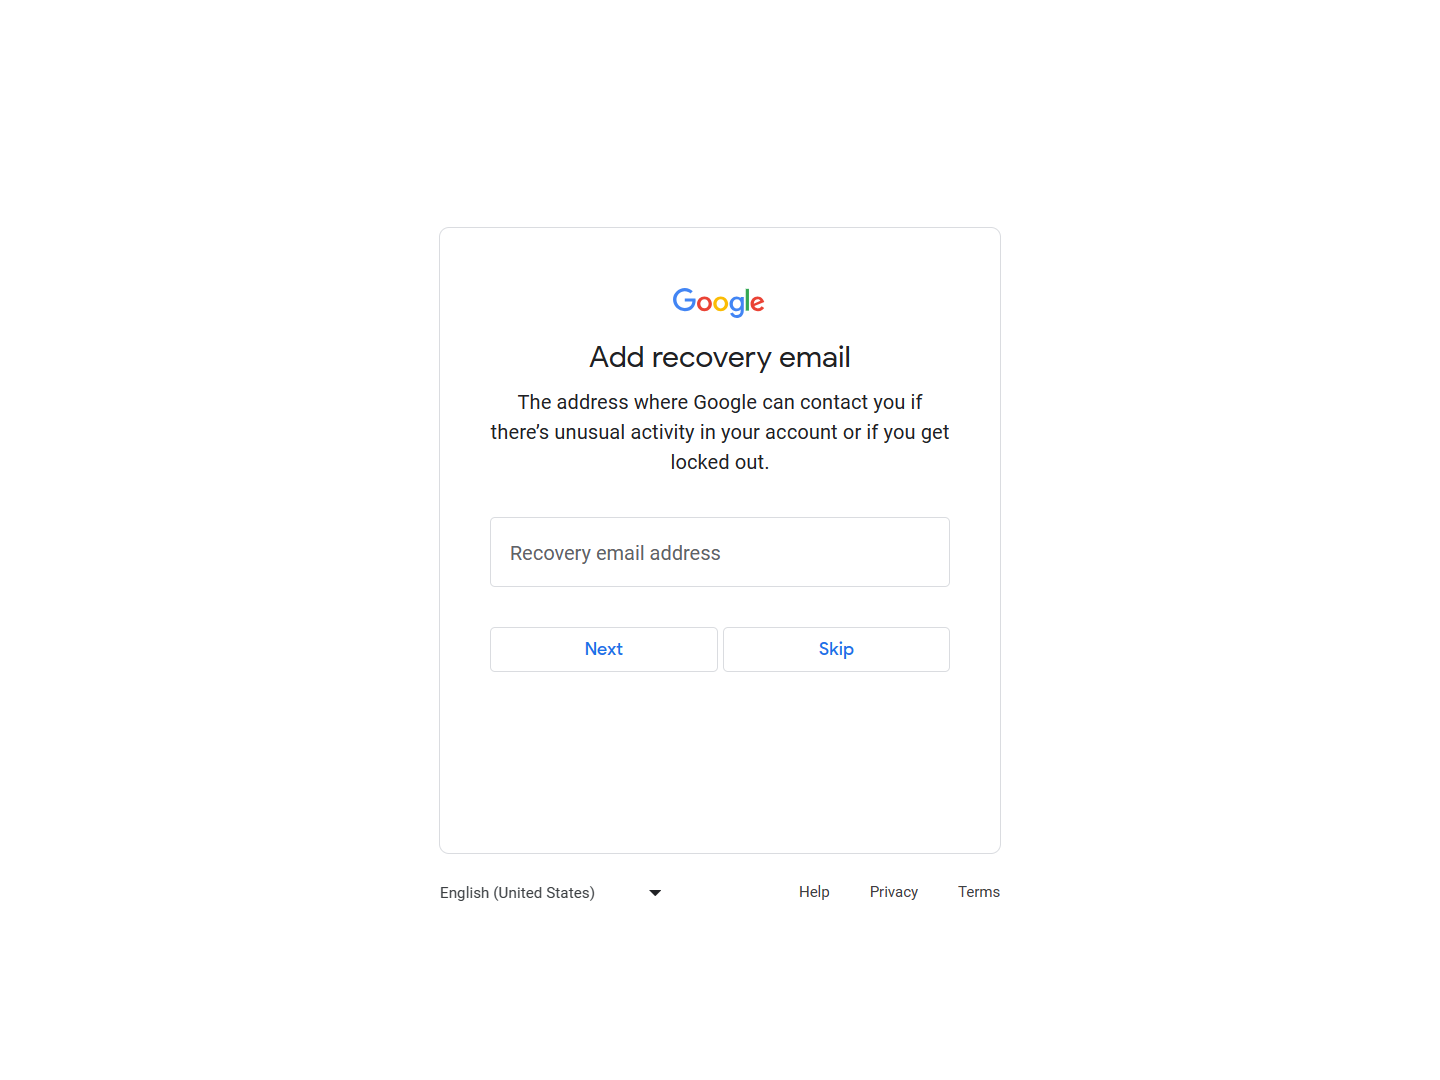 adding a recovery email to Gmail